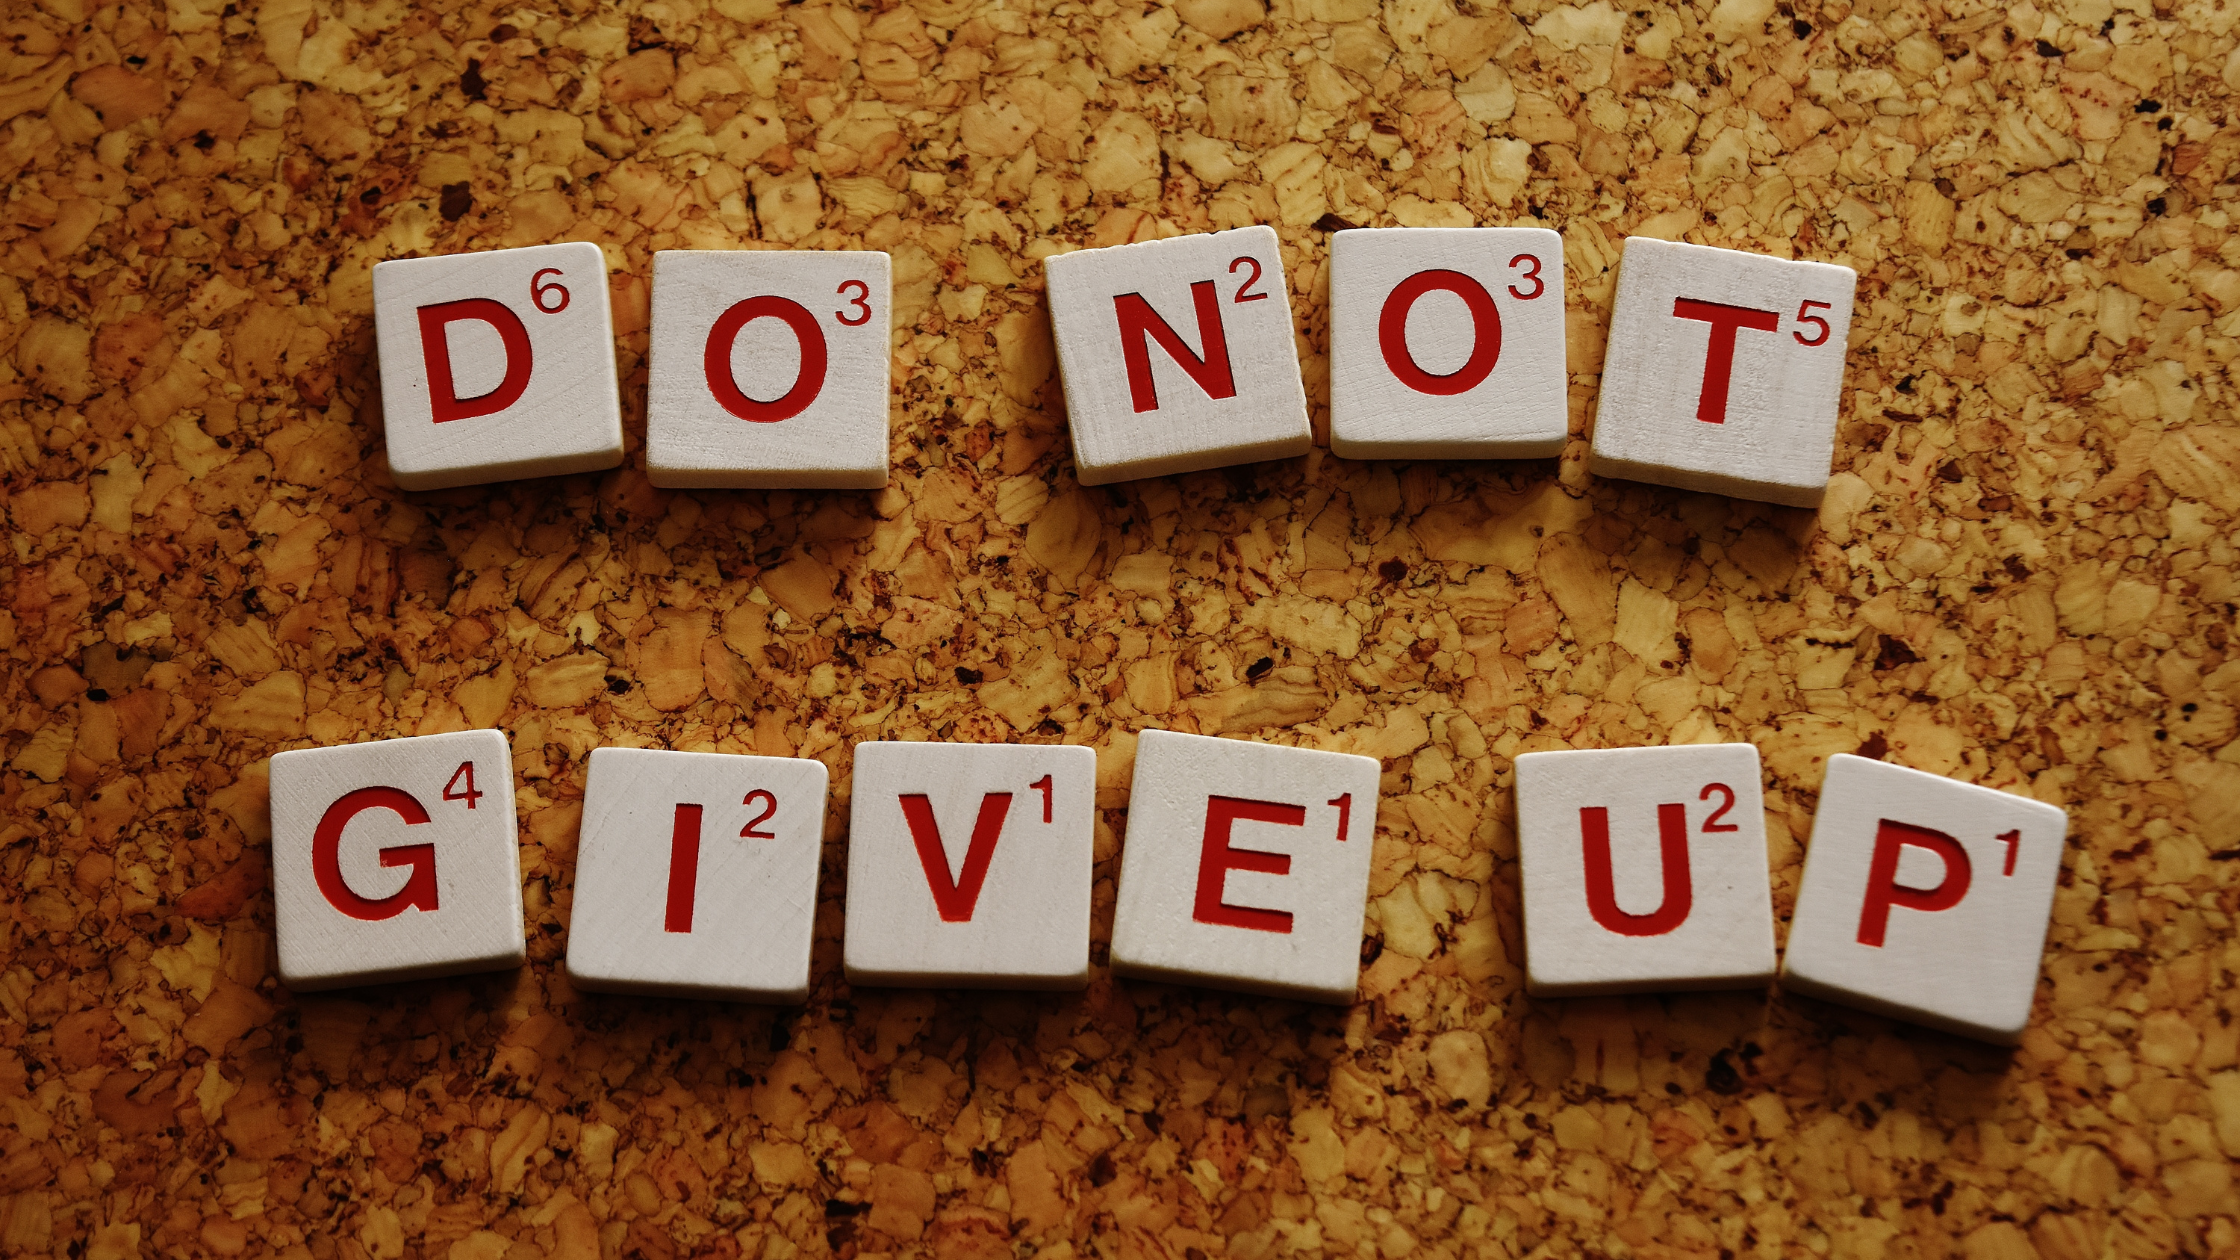 Scrabble letters on a cork board that spell out the words "do not give up".